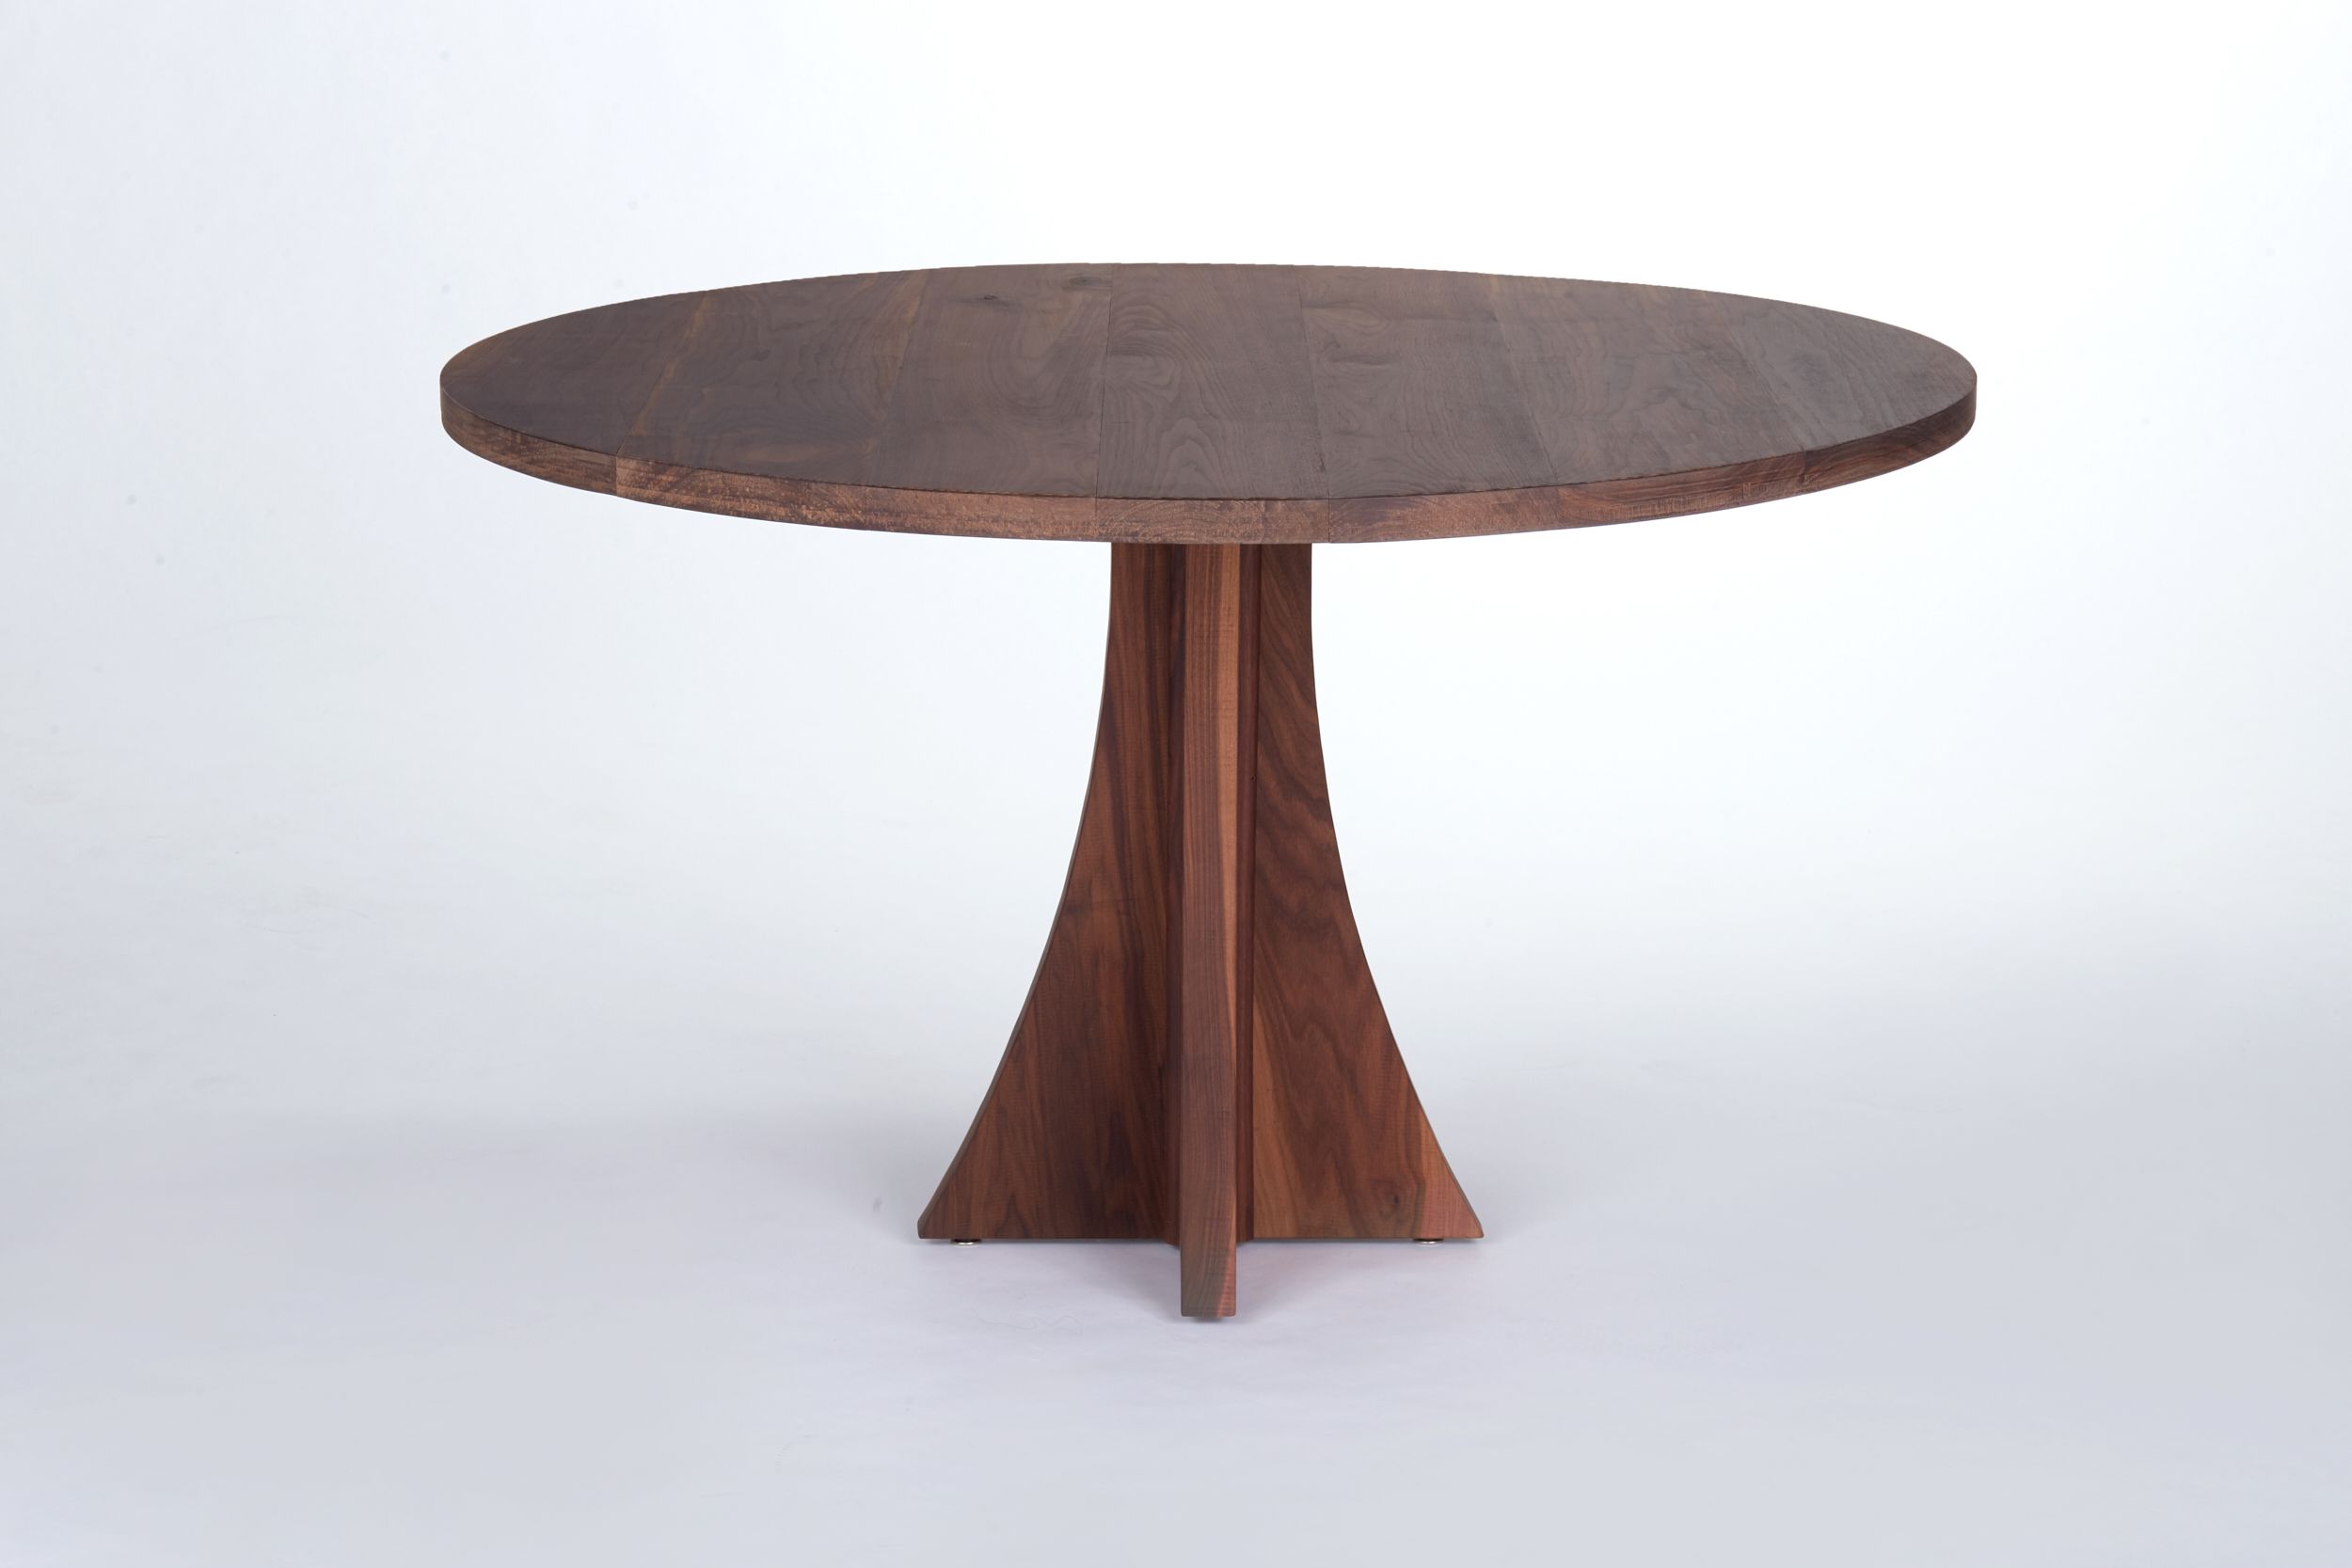 Custom Solid Walnut Round Dining Table By The Urban Reclaimed Co Custommadecom